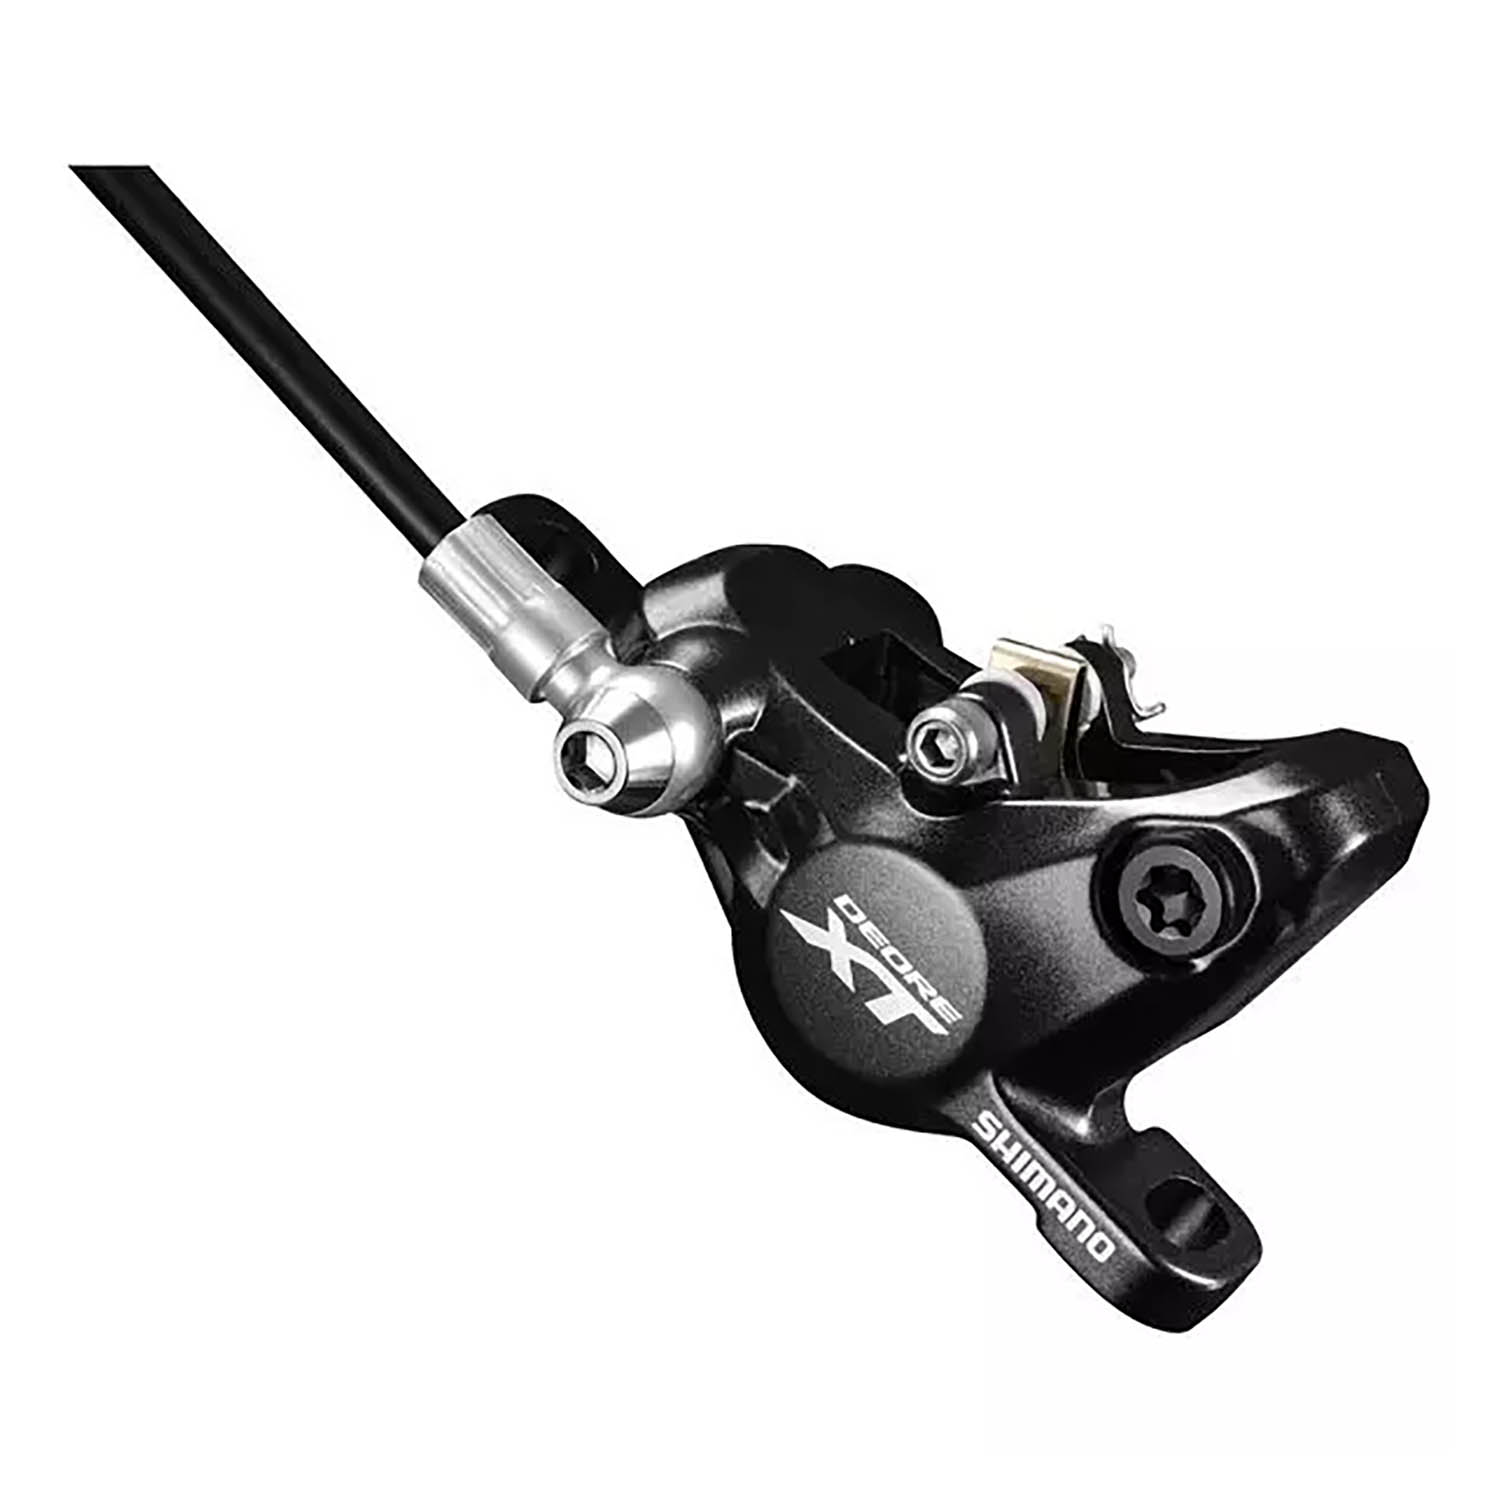 Shimano remklauw Deore XT BR-M8000